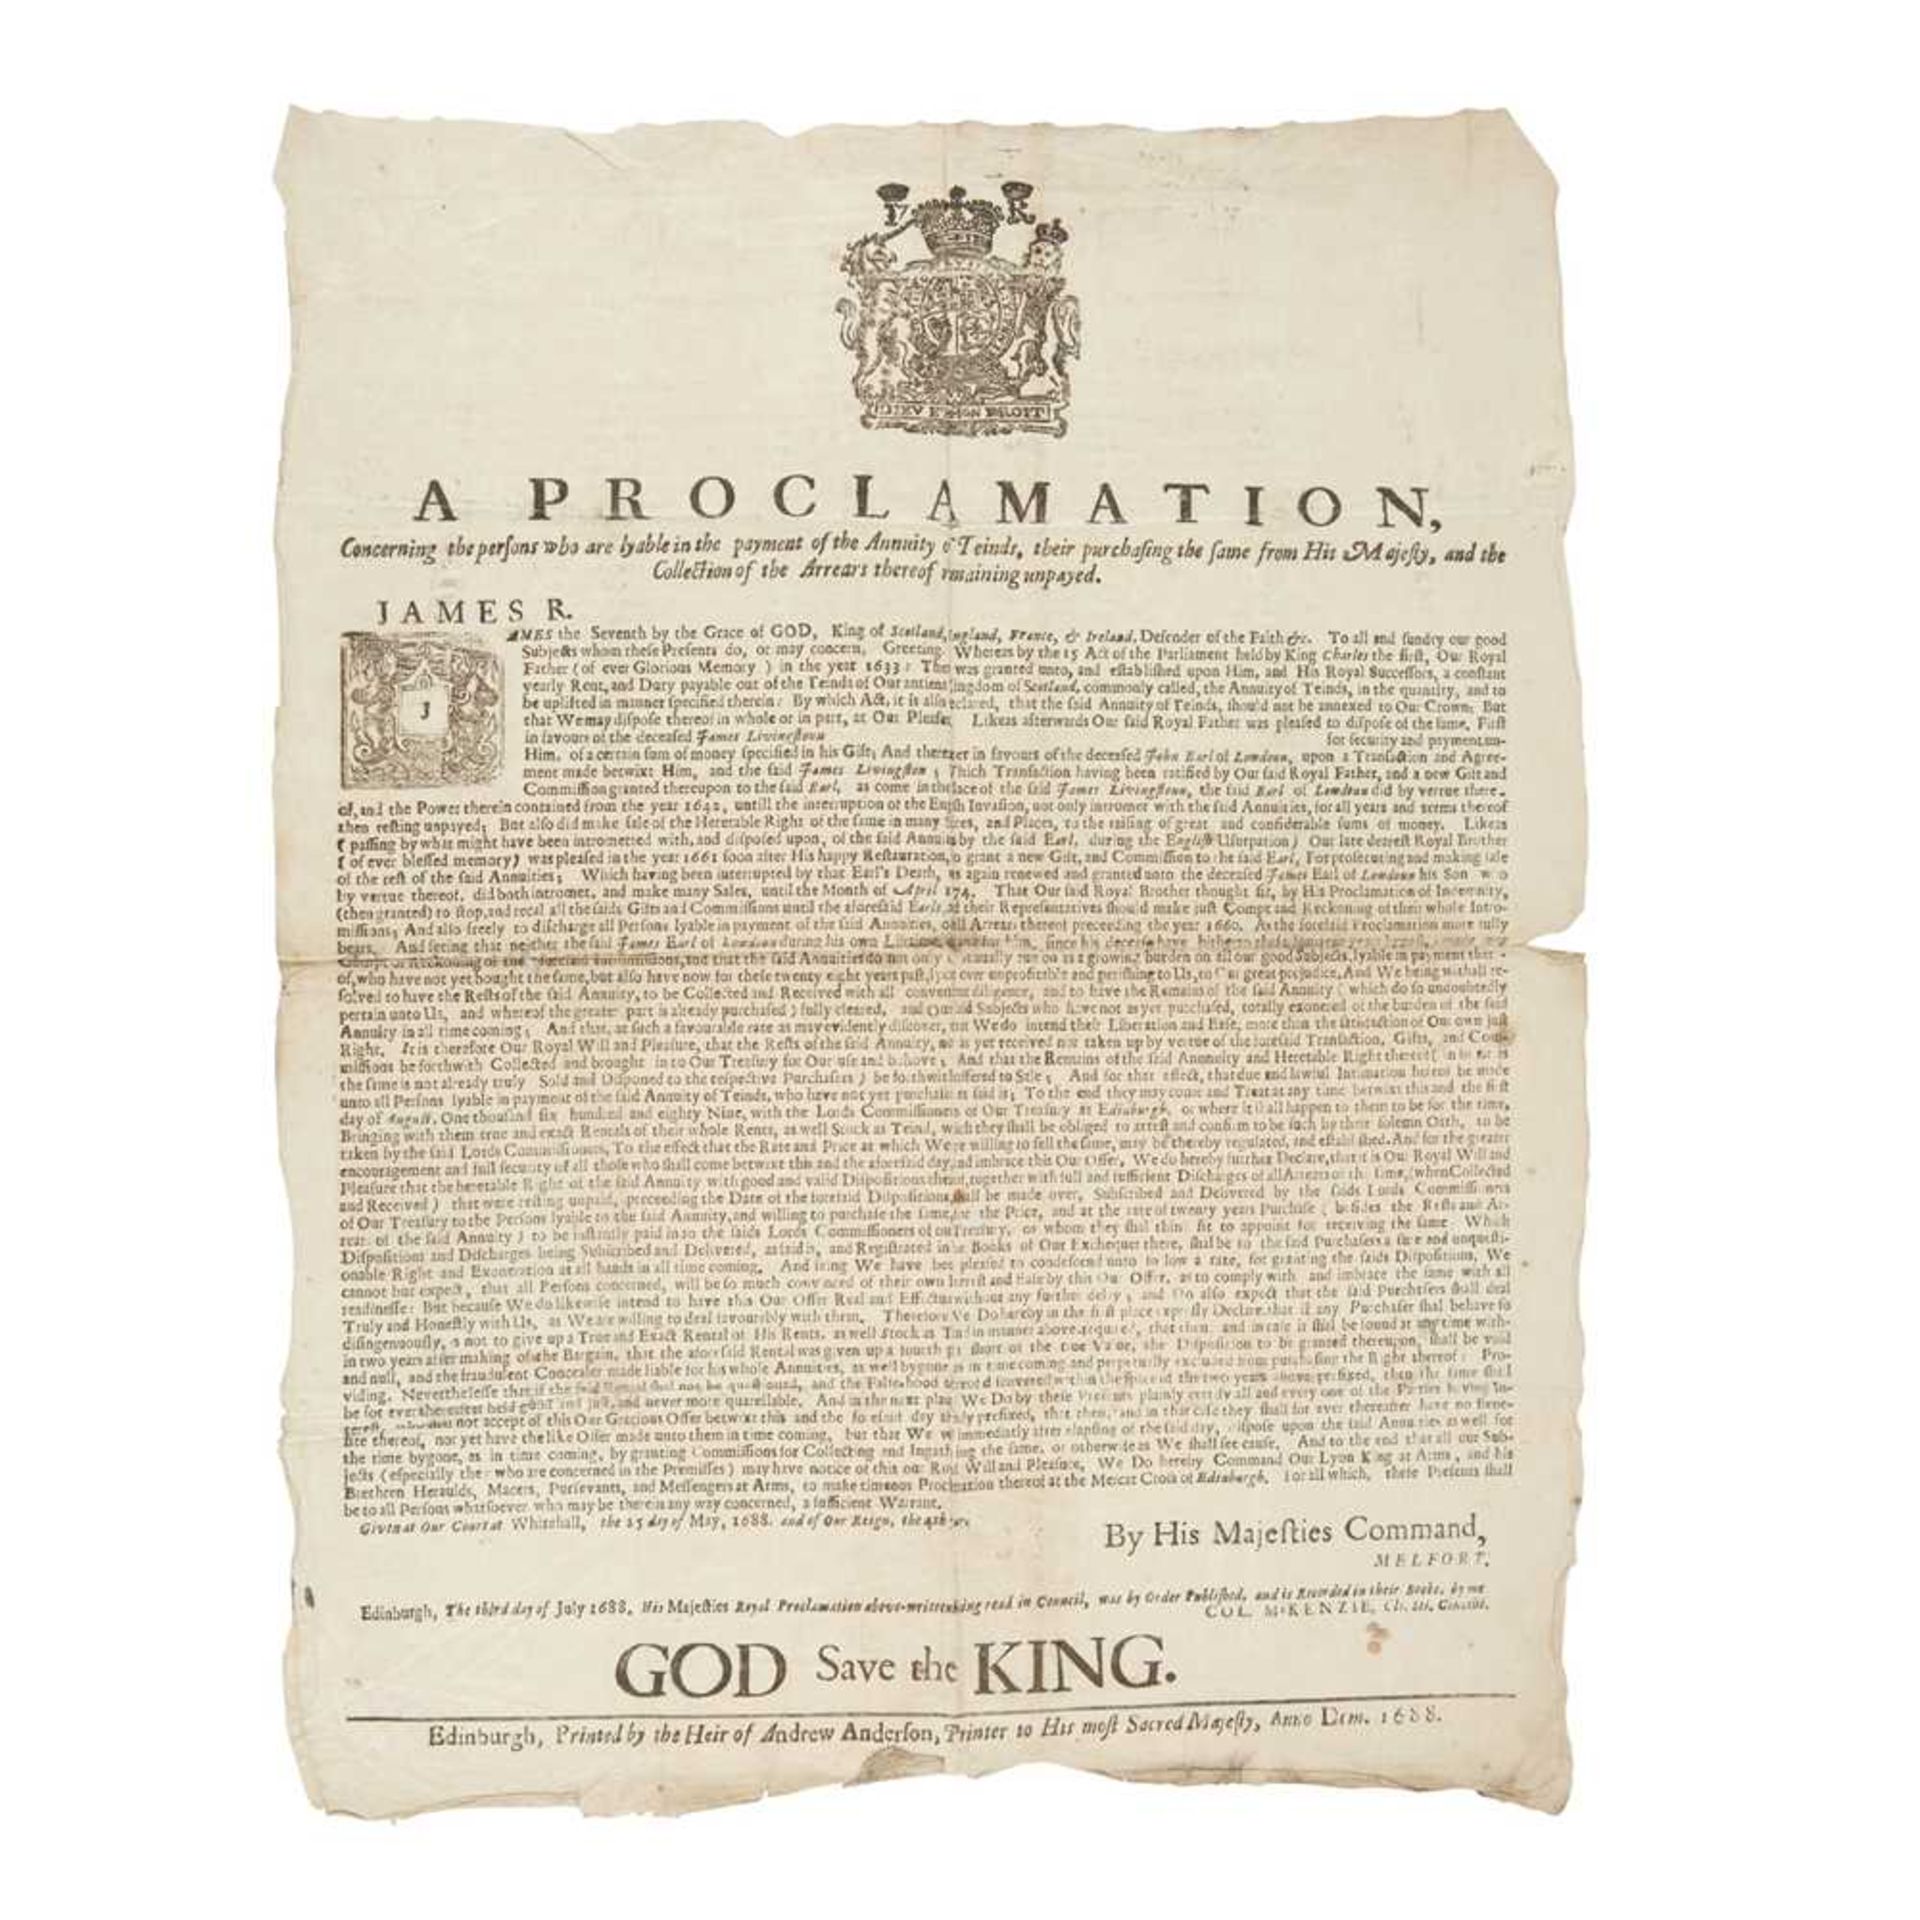 [James VII Broadside] A Proclamation concerning the persons who are lyable in the payment of